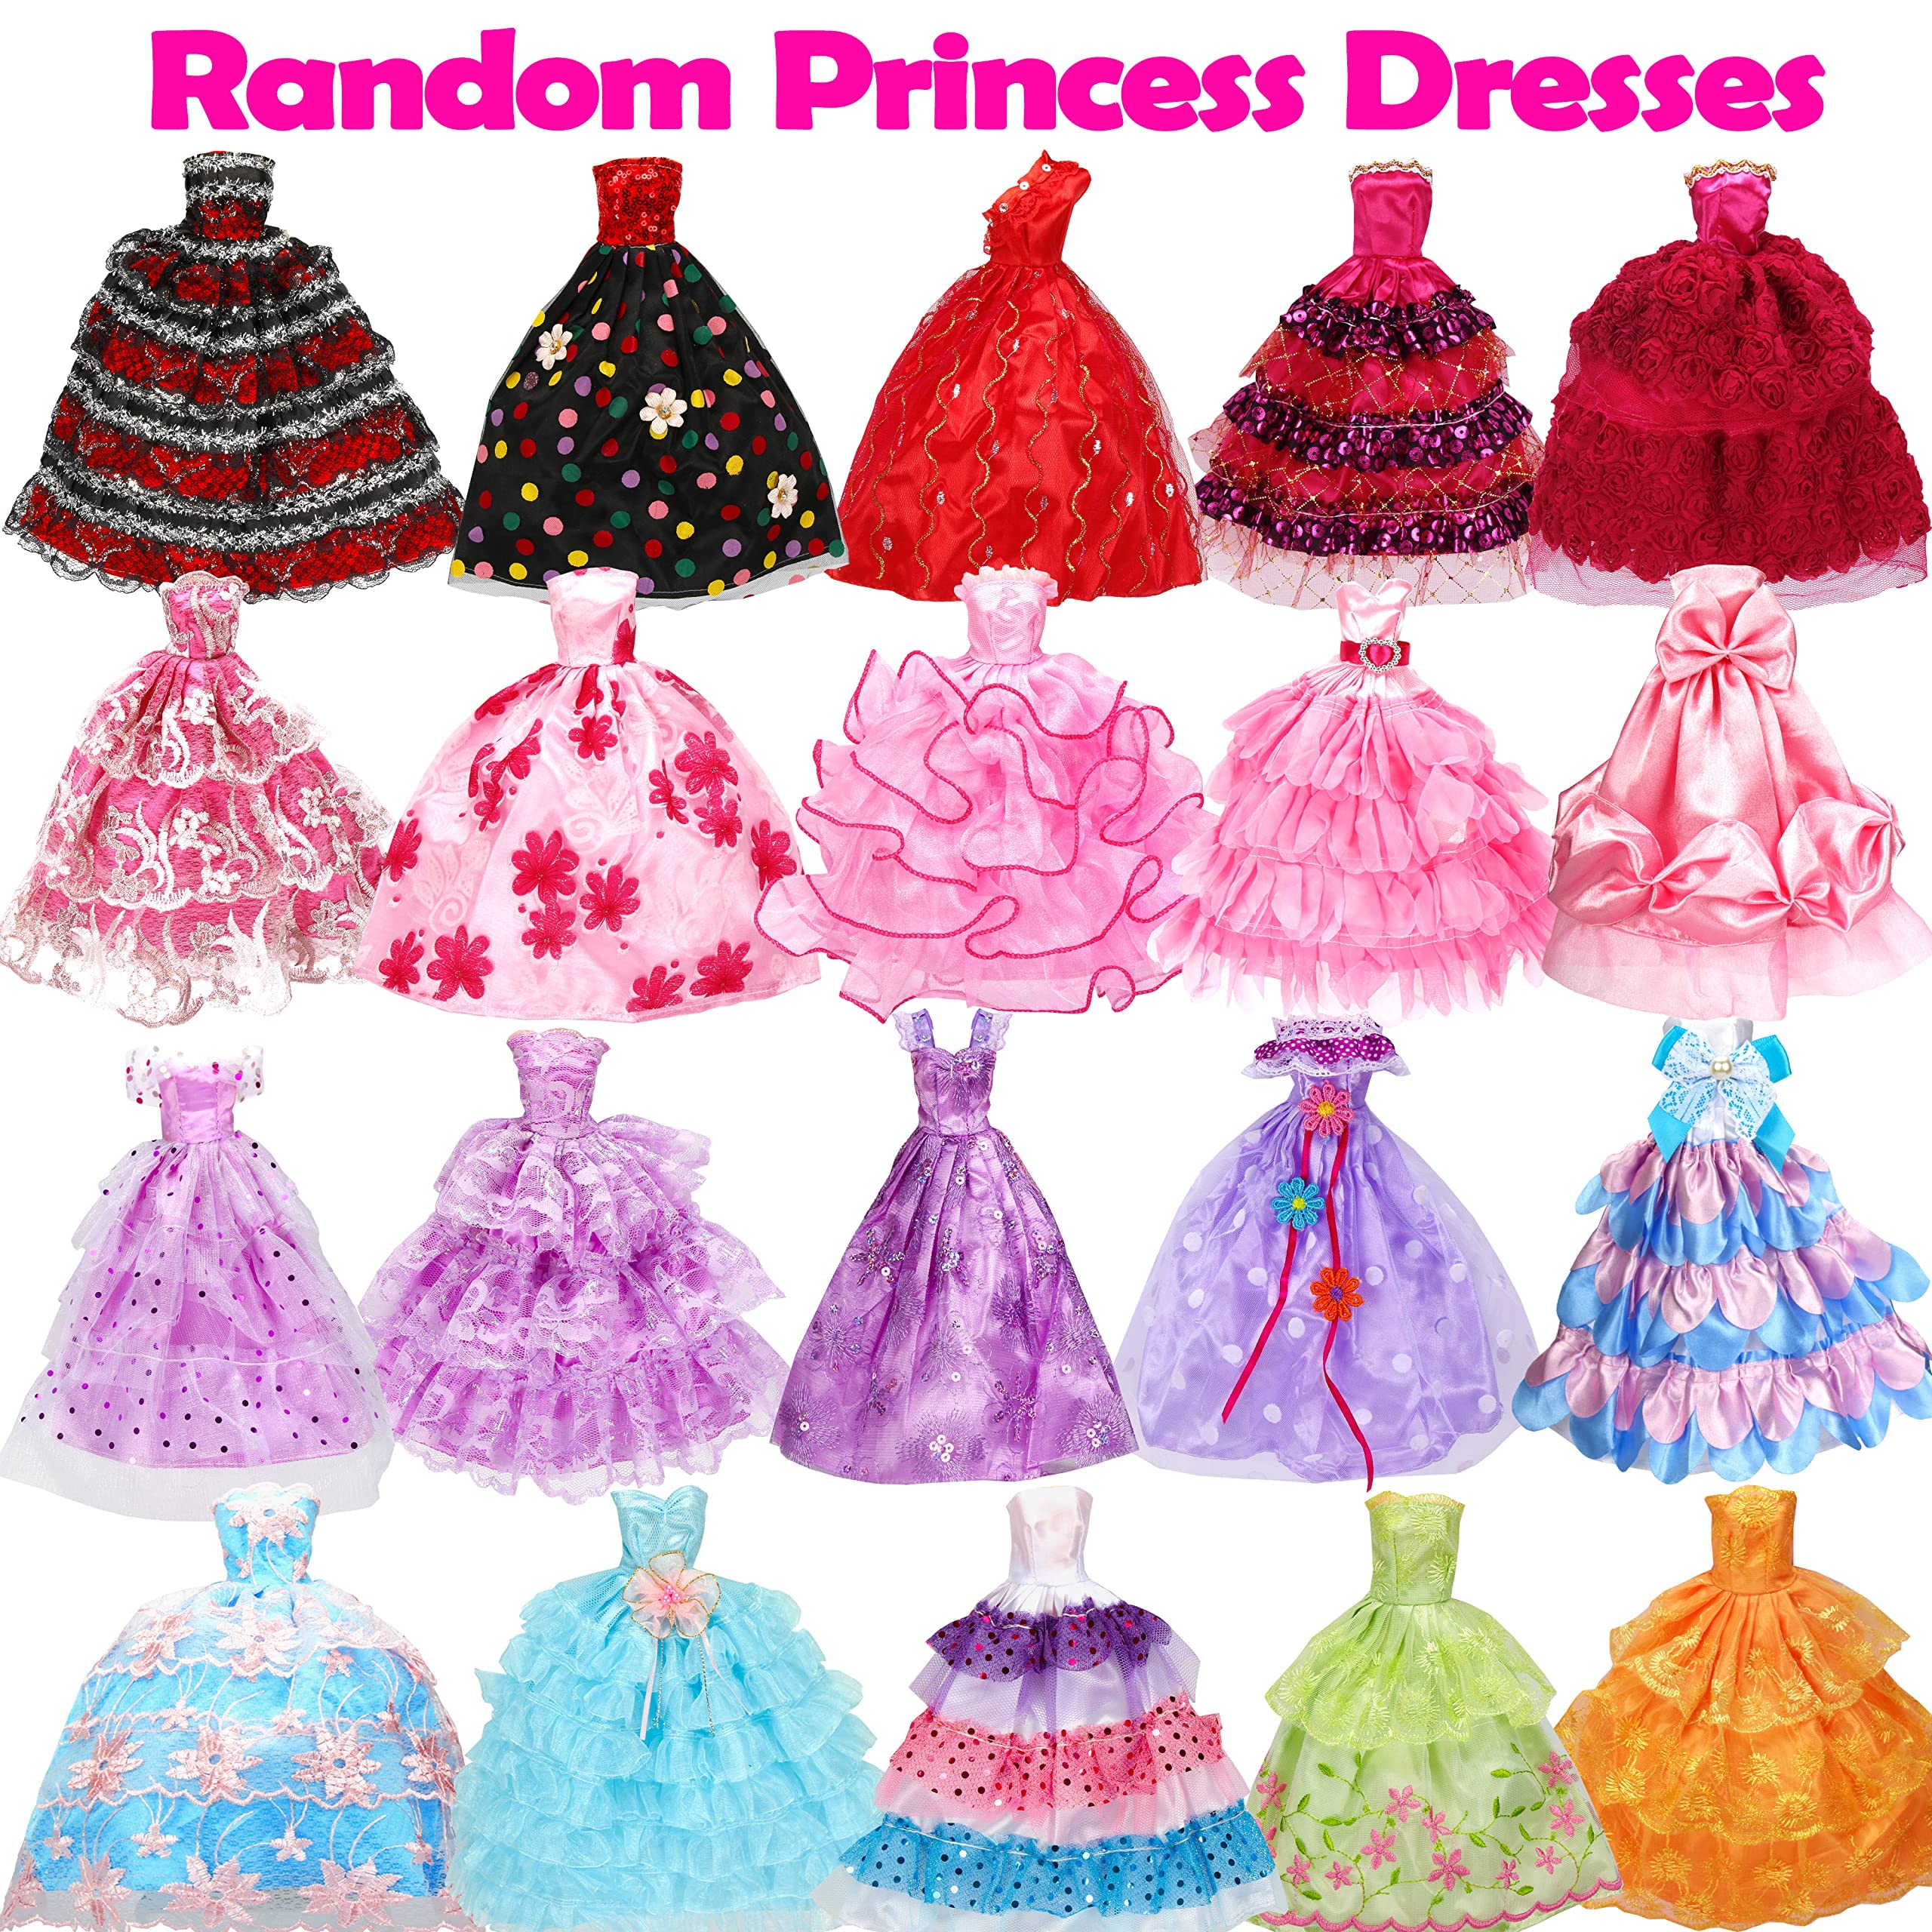 Buy 50 Pcs Doll Clothes and Accessories, 5 Wedding Gowns 5 Fashion